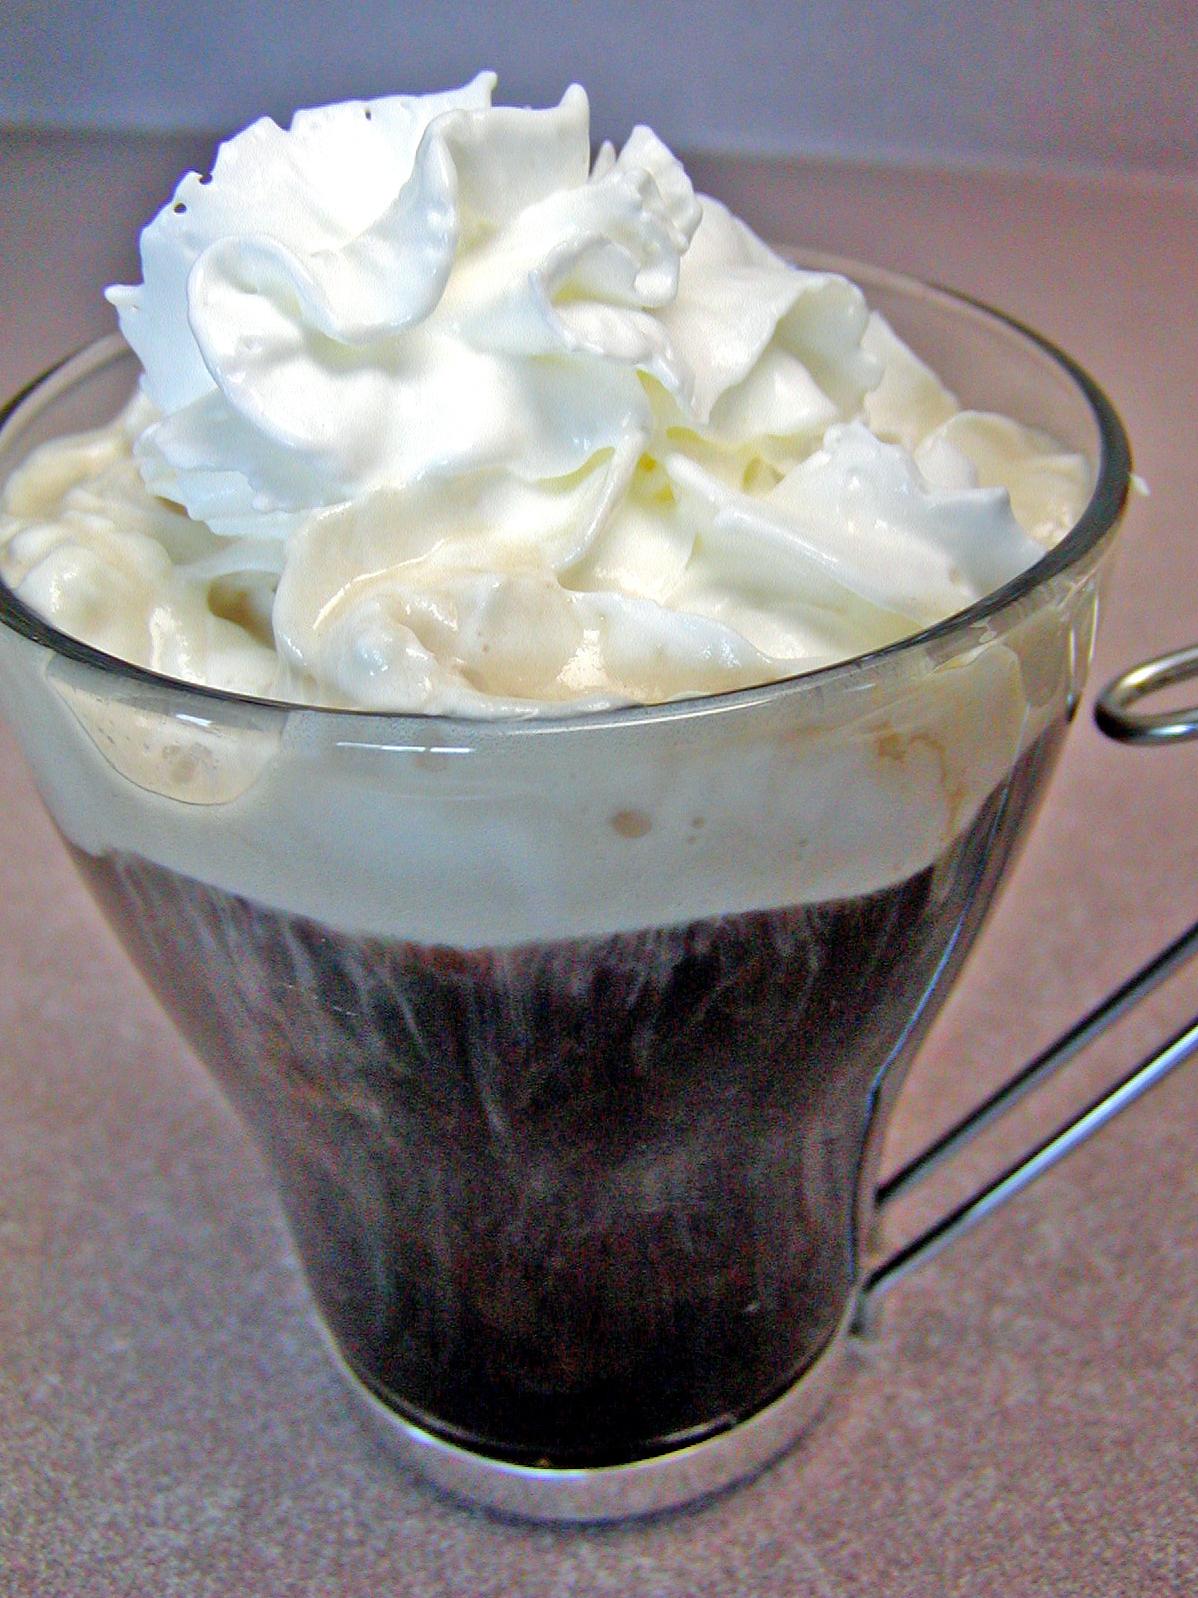  This hot beverage will definitely make your taste buds dance with joy.